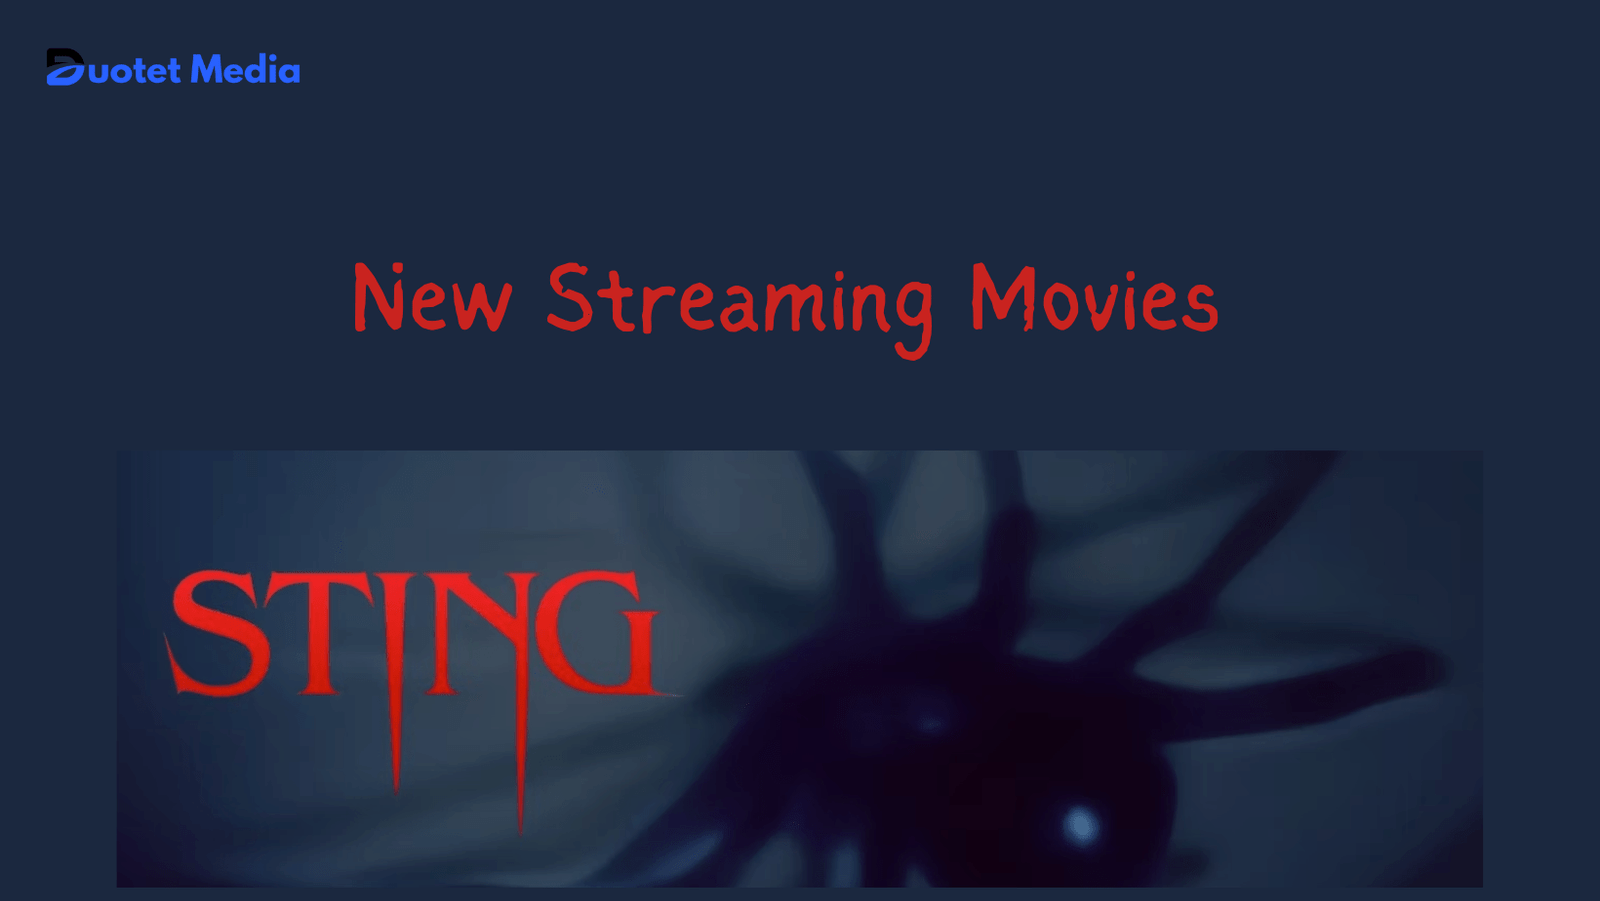 New Streaming Movies